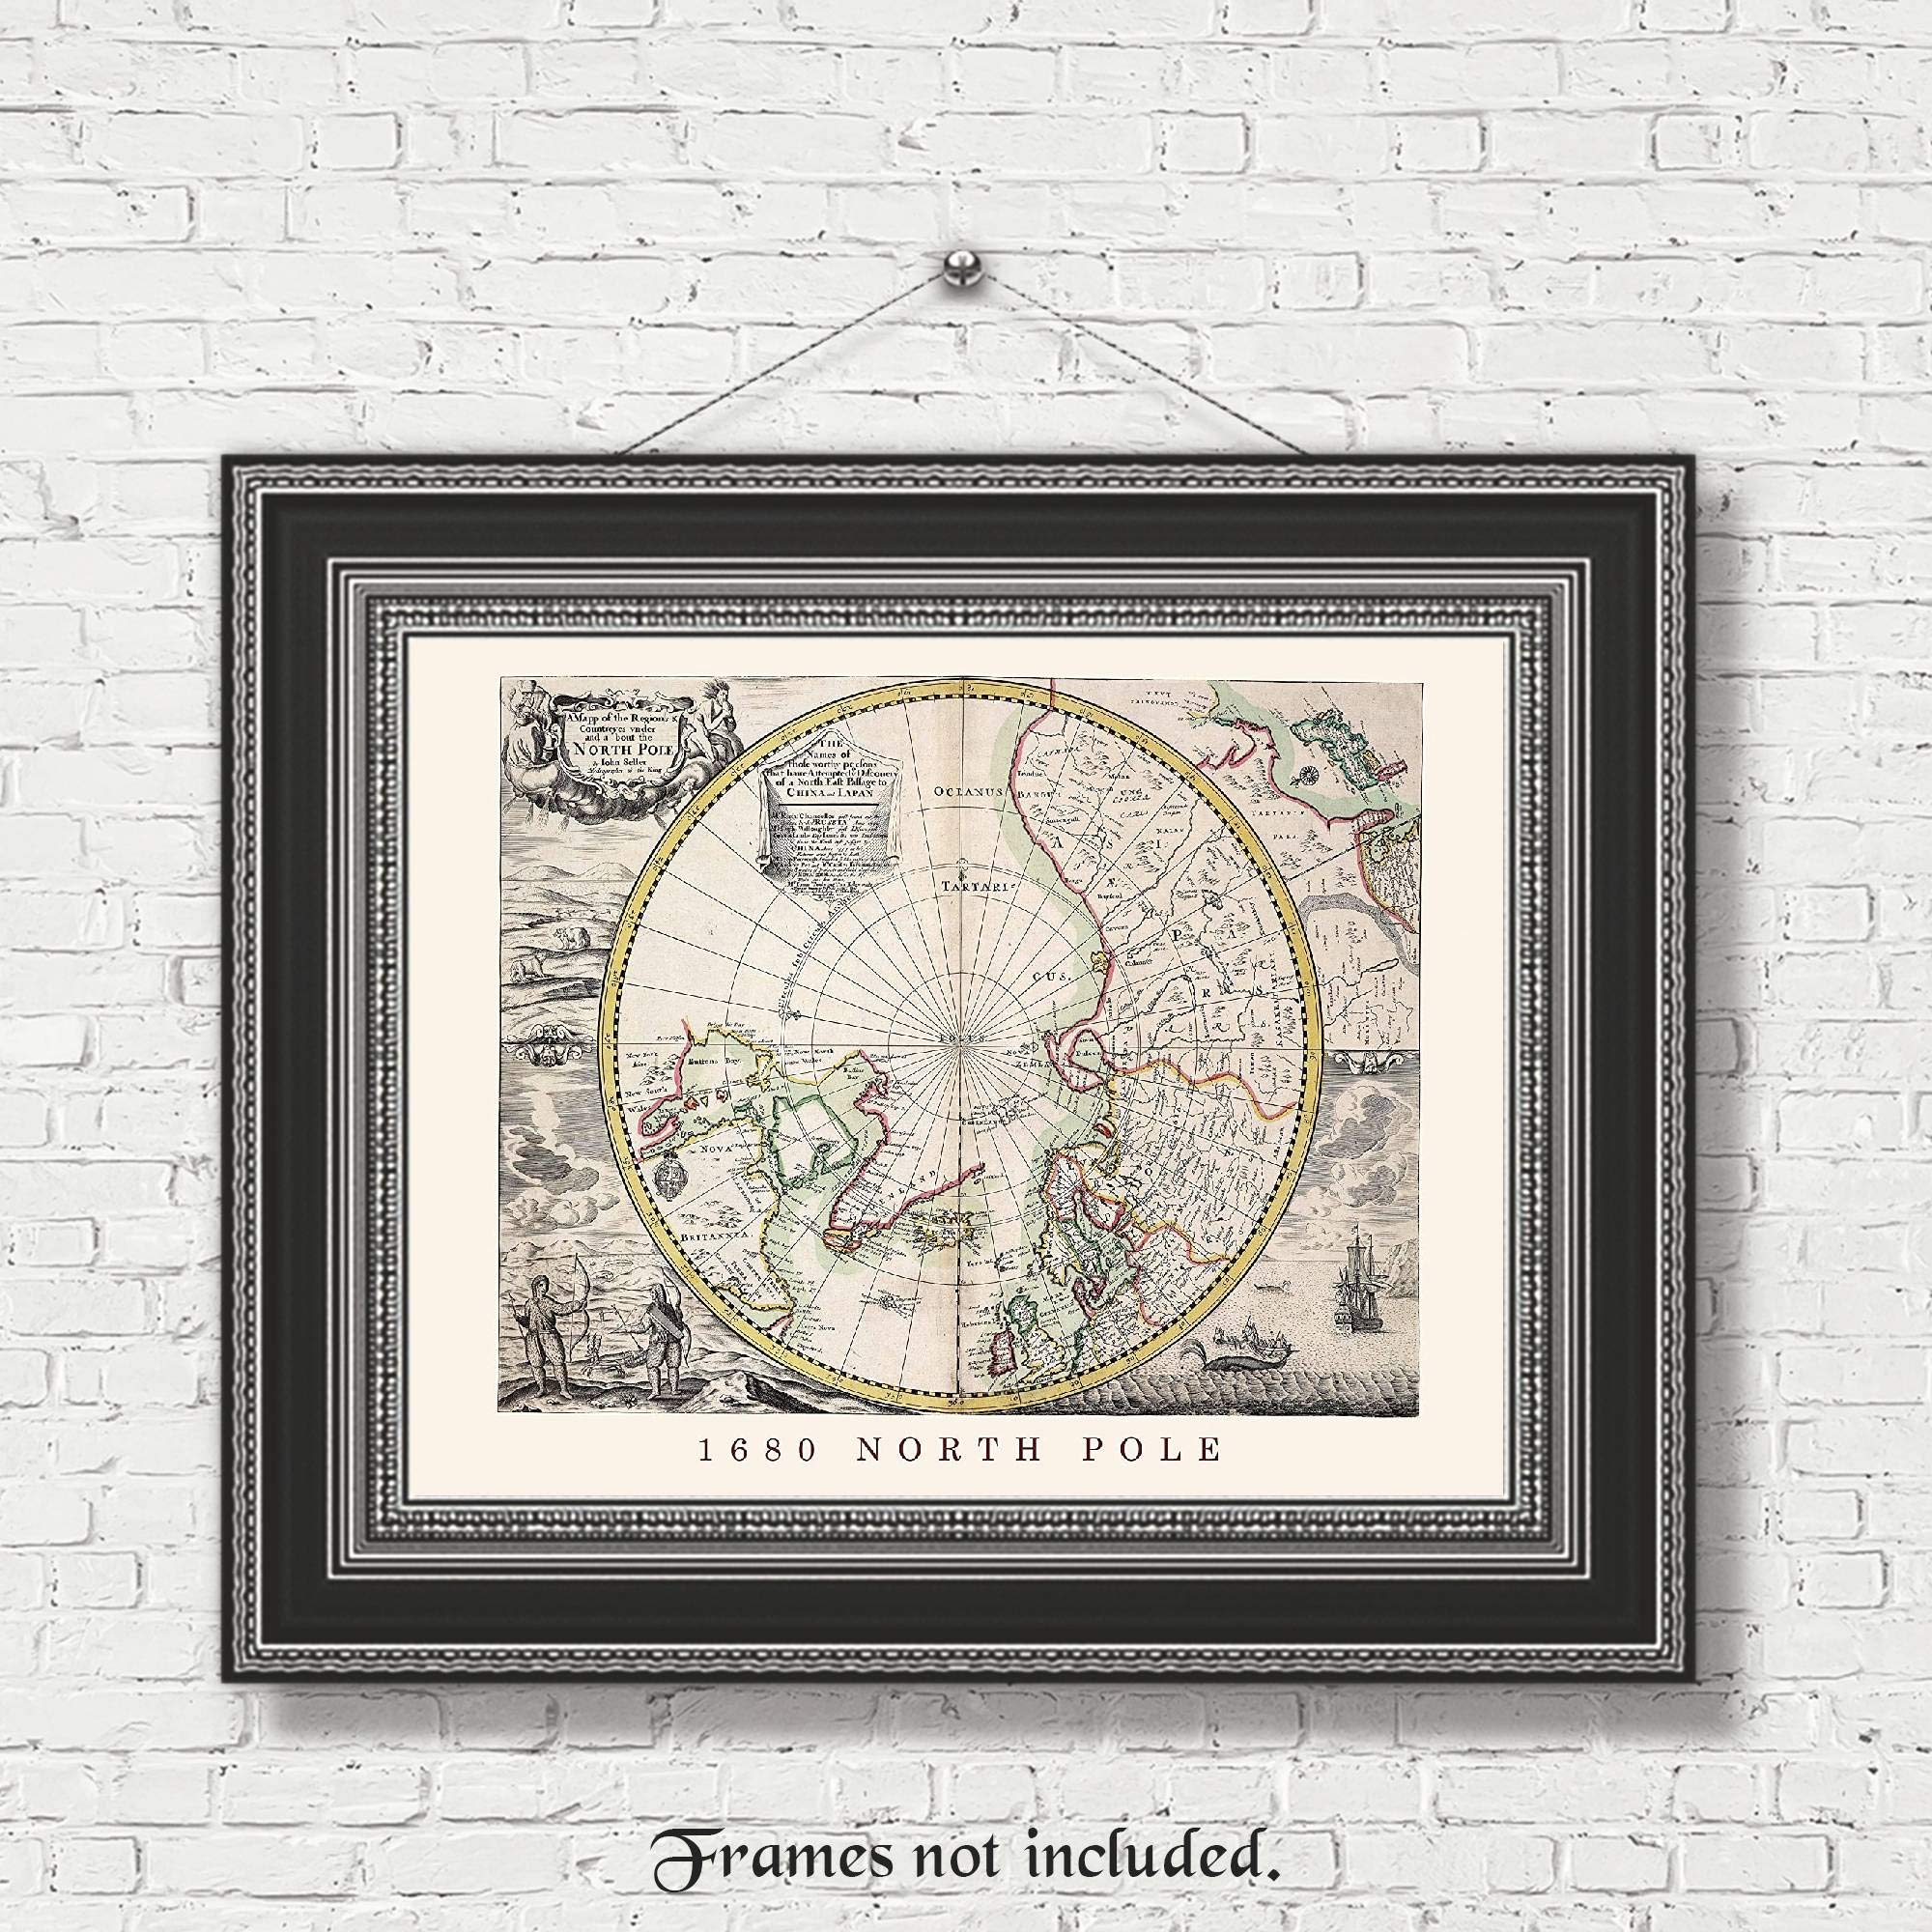 Vintage North Pole Replica Map Prints, 1 (11x14) Unframed Photos, Wall Art Decor Gifts for Home Geography Office Studio Library Lounge School Science College Student Teacher Coach World Explorer Fans